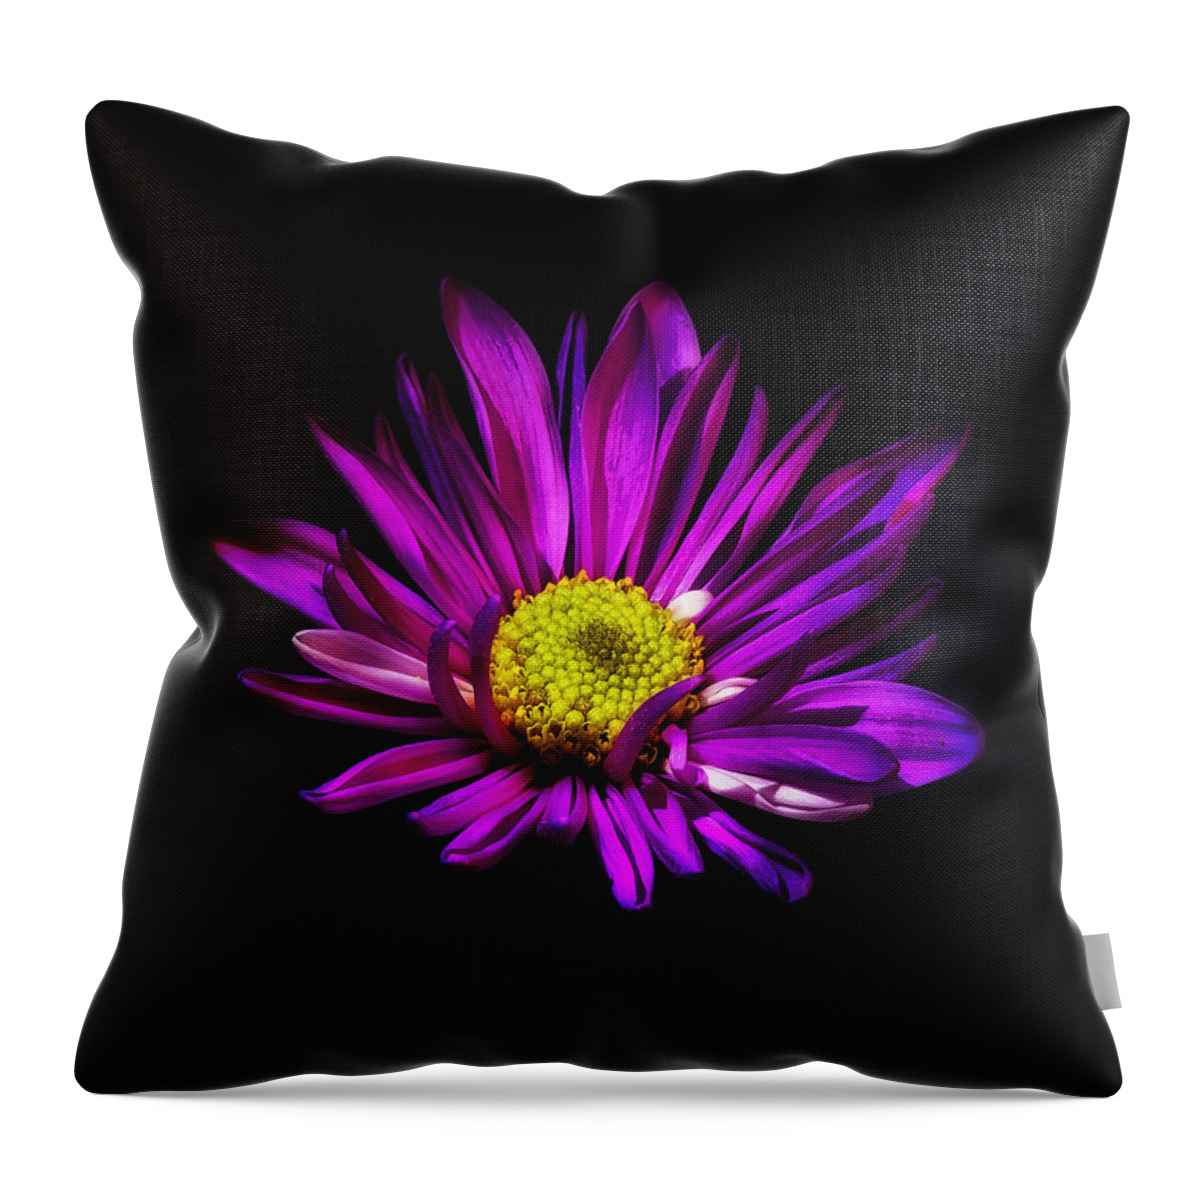 Flower Throw Pillow featuring the photograph Fuchsia Floral Bloom by Bill and Linda Tiepelman